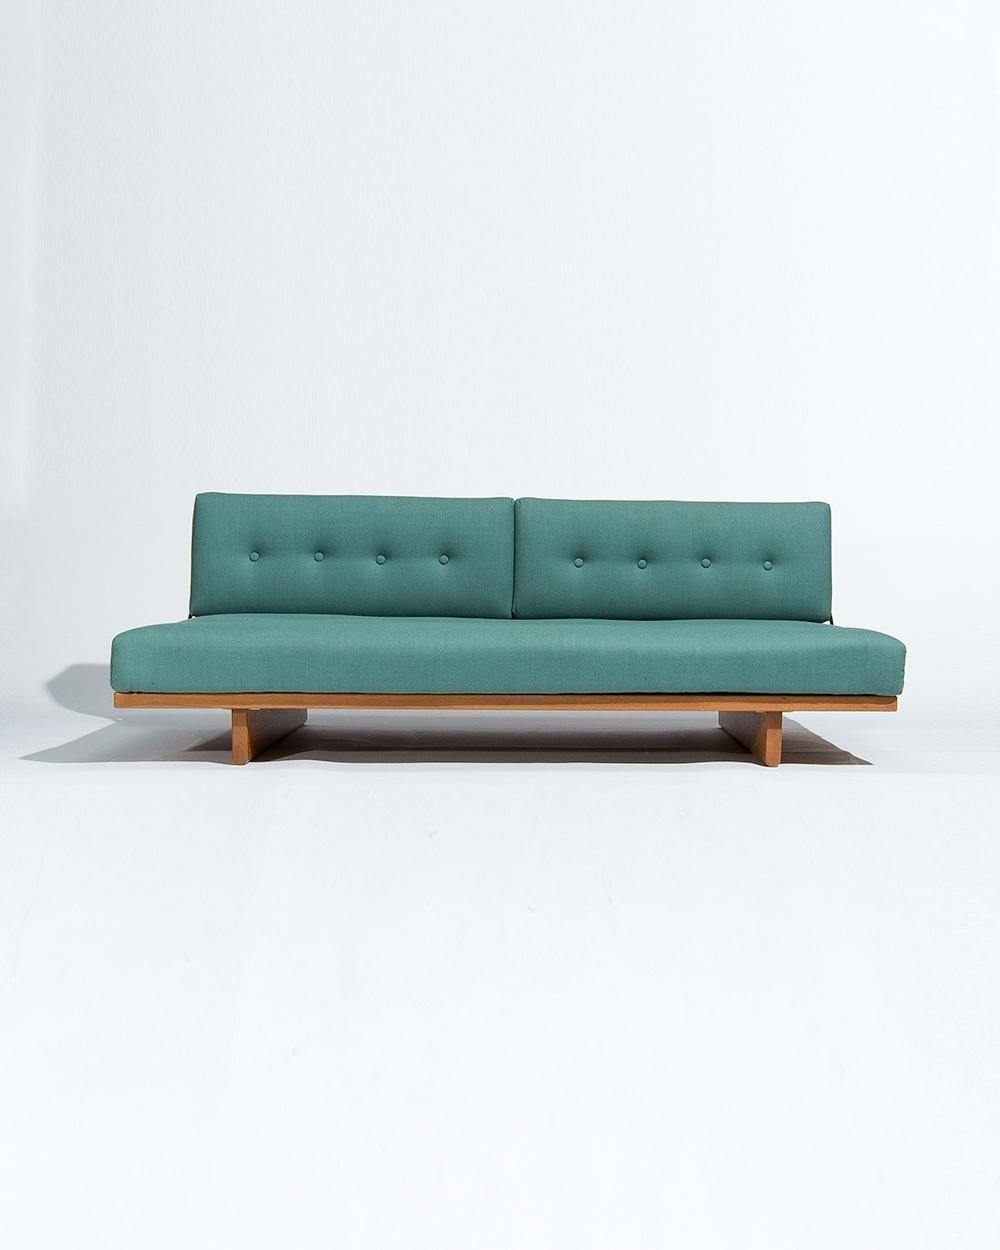 
A Danish sofa bed in oak designed by Borge Mogensen for Fredericia Stolefabrik in the 1950s. An iconic design by one of the preeminent designers of the period this piece is a low sofa that doubles up as a bed, designed for practical modern living